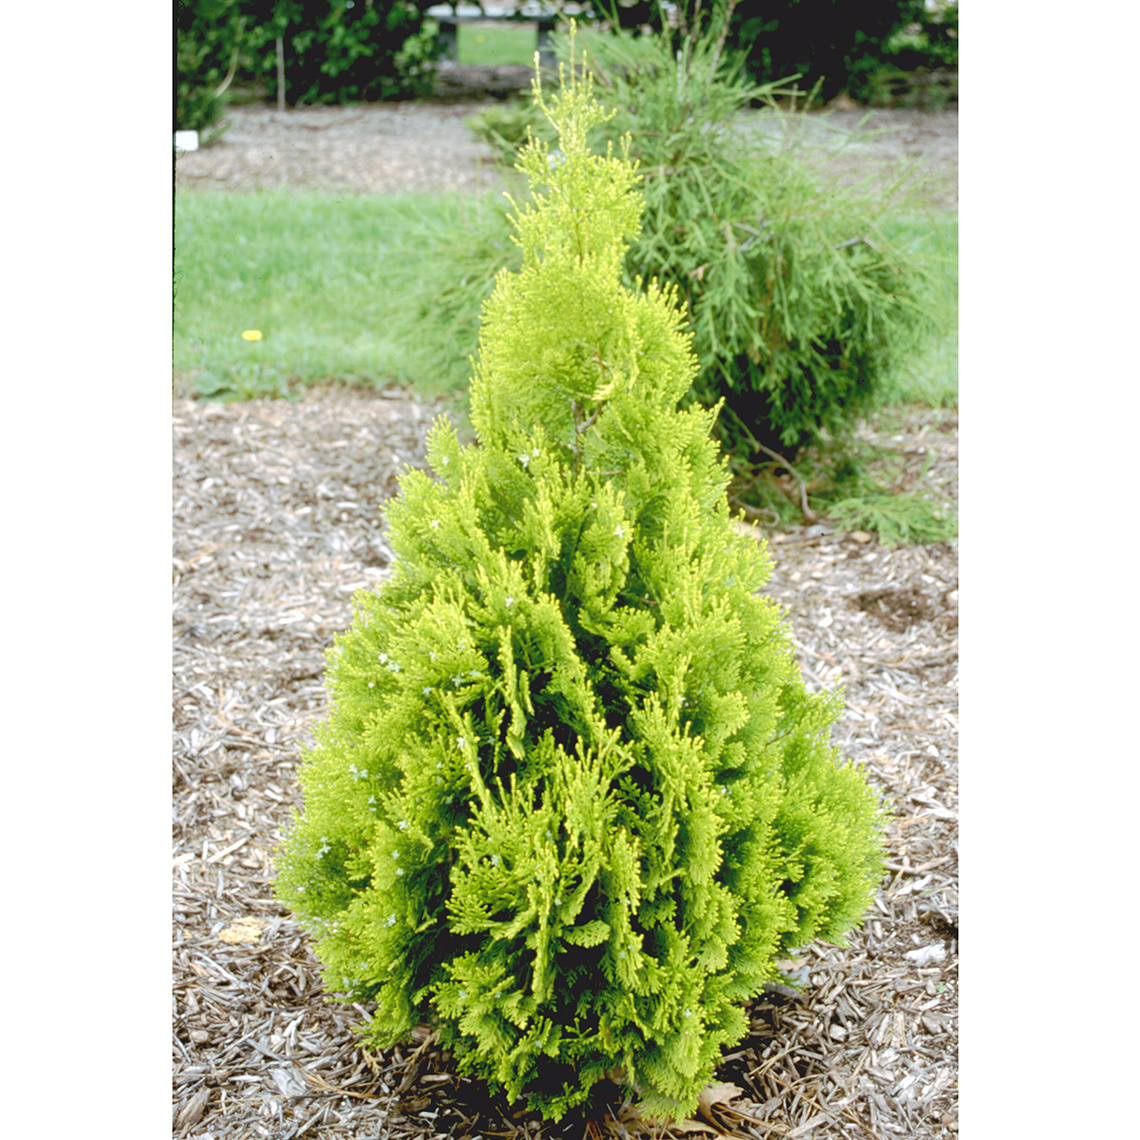 Beverly Hills arborvitae has soft texture and glowing golden color